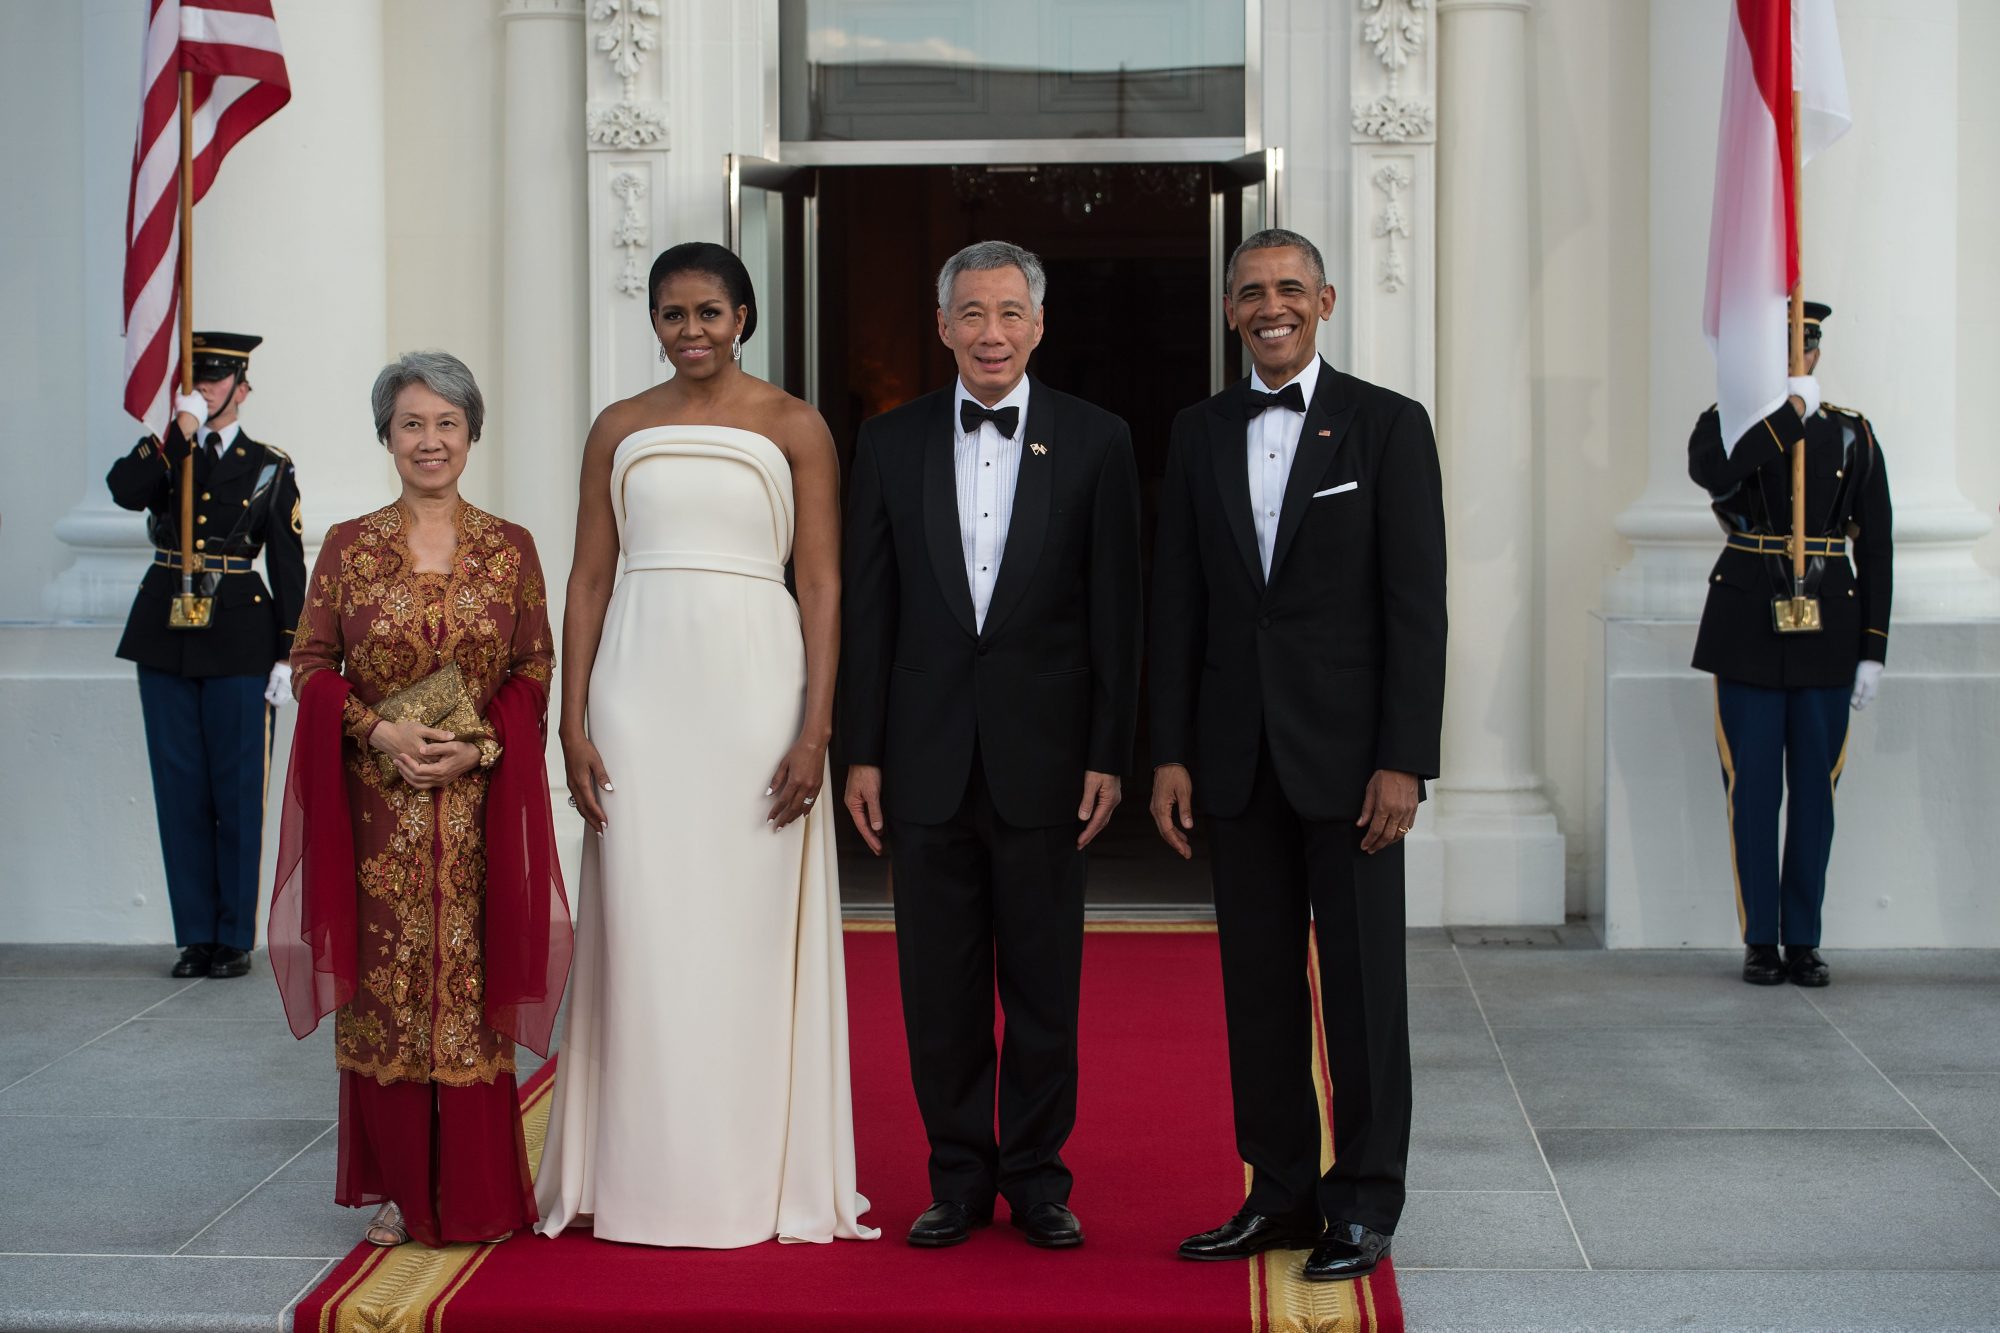 US President Barack Obama (R) and First Lady Michelle Obama (2nd L) greet Singapore's Prime Minister Lee Hsien Loong (2nd R) and his wife Ho Ching for a state dinner at the White House in Washington, DC, on August 2, 2016. / AFP / NICHOLAS KAMM        (Photo credit should read NICHOLAS KAMM/AFP/Getty Images)